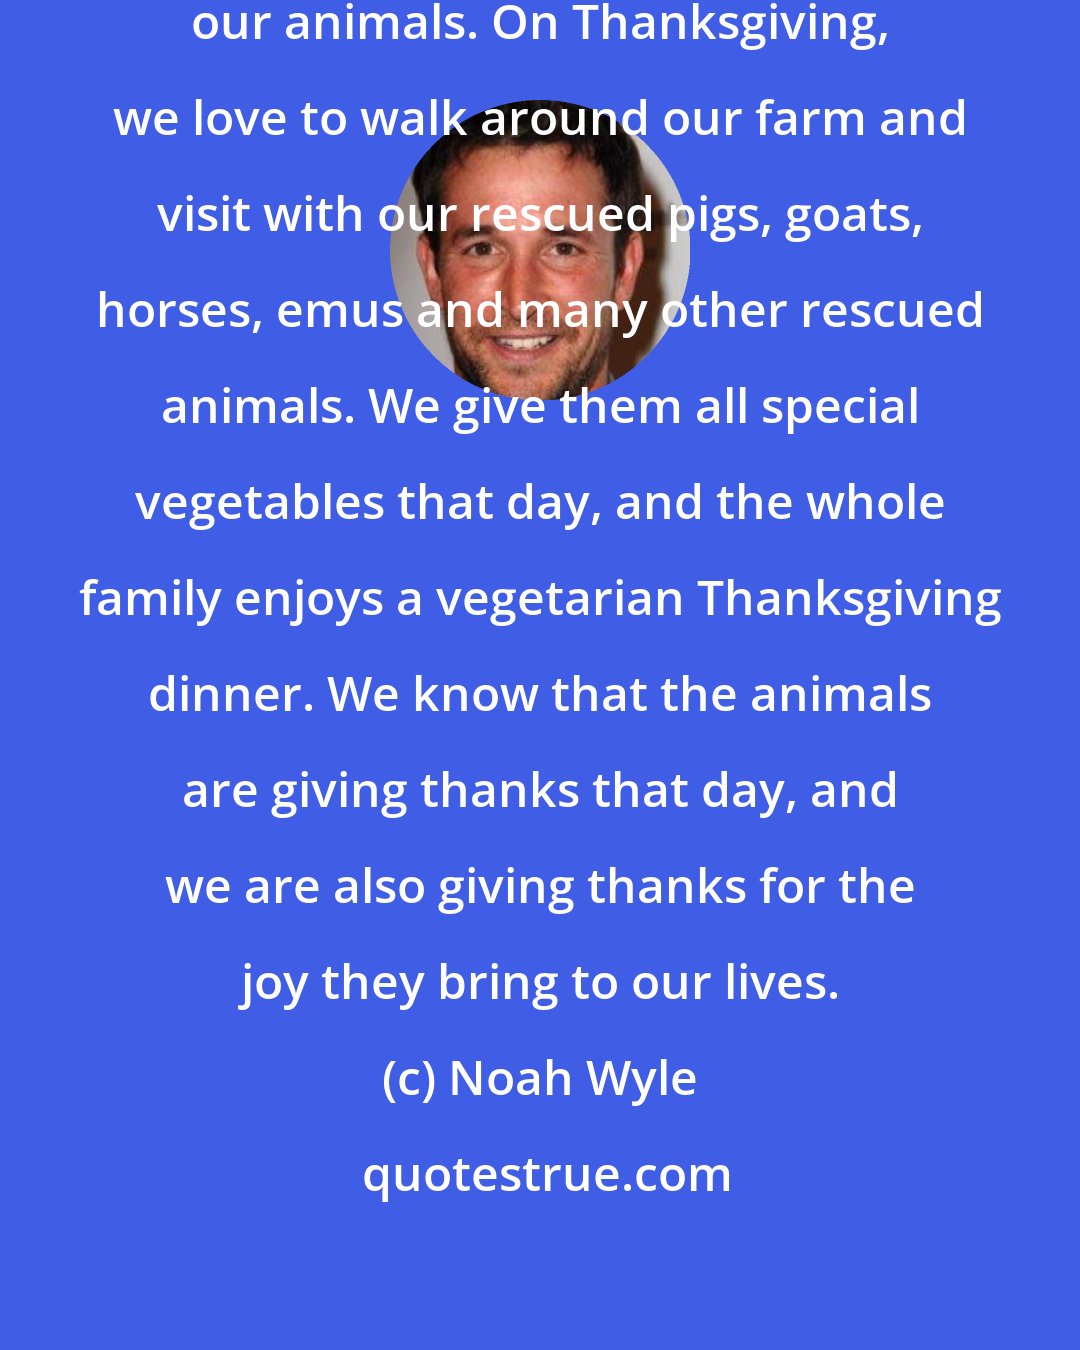 Noah Wyle: Our family holidays always include our animals. On Thanksgiving, we love to walk around our farm and visit with our rescued pigs, goats, horses, emus and many other rescued animals. We give them all special vegetables that day, and the whole family enjoys a vegetarian Thanksgiving dinner. We know that the animals are giving thanks that day, and we are also giving thanks for the joy they bring to our lives.